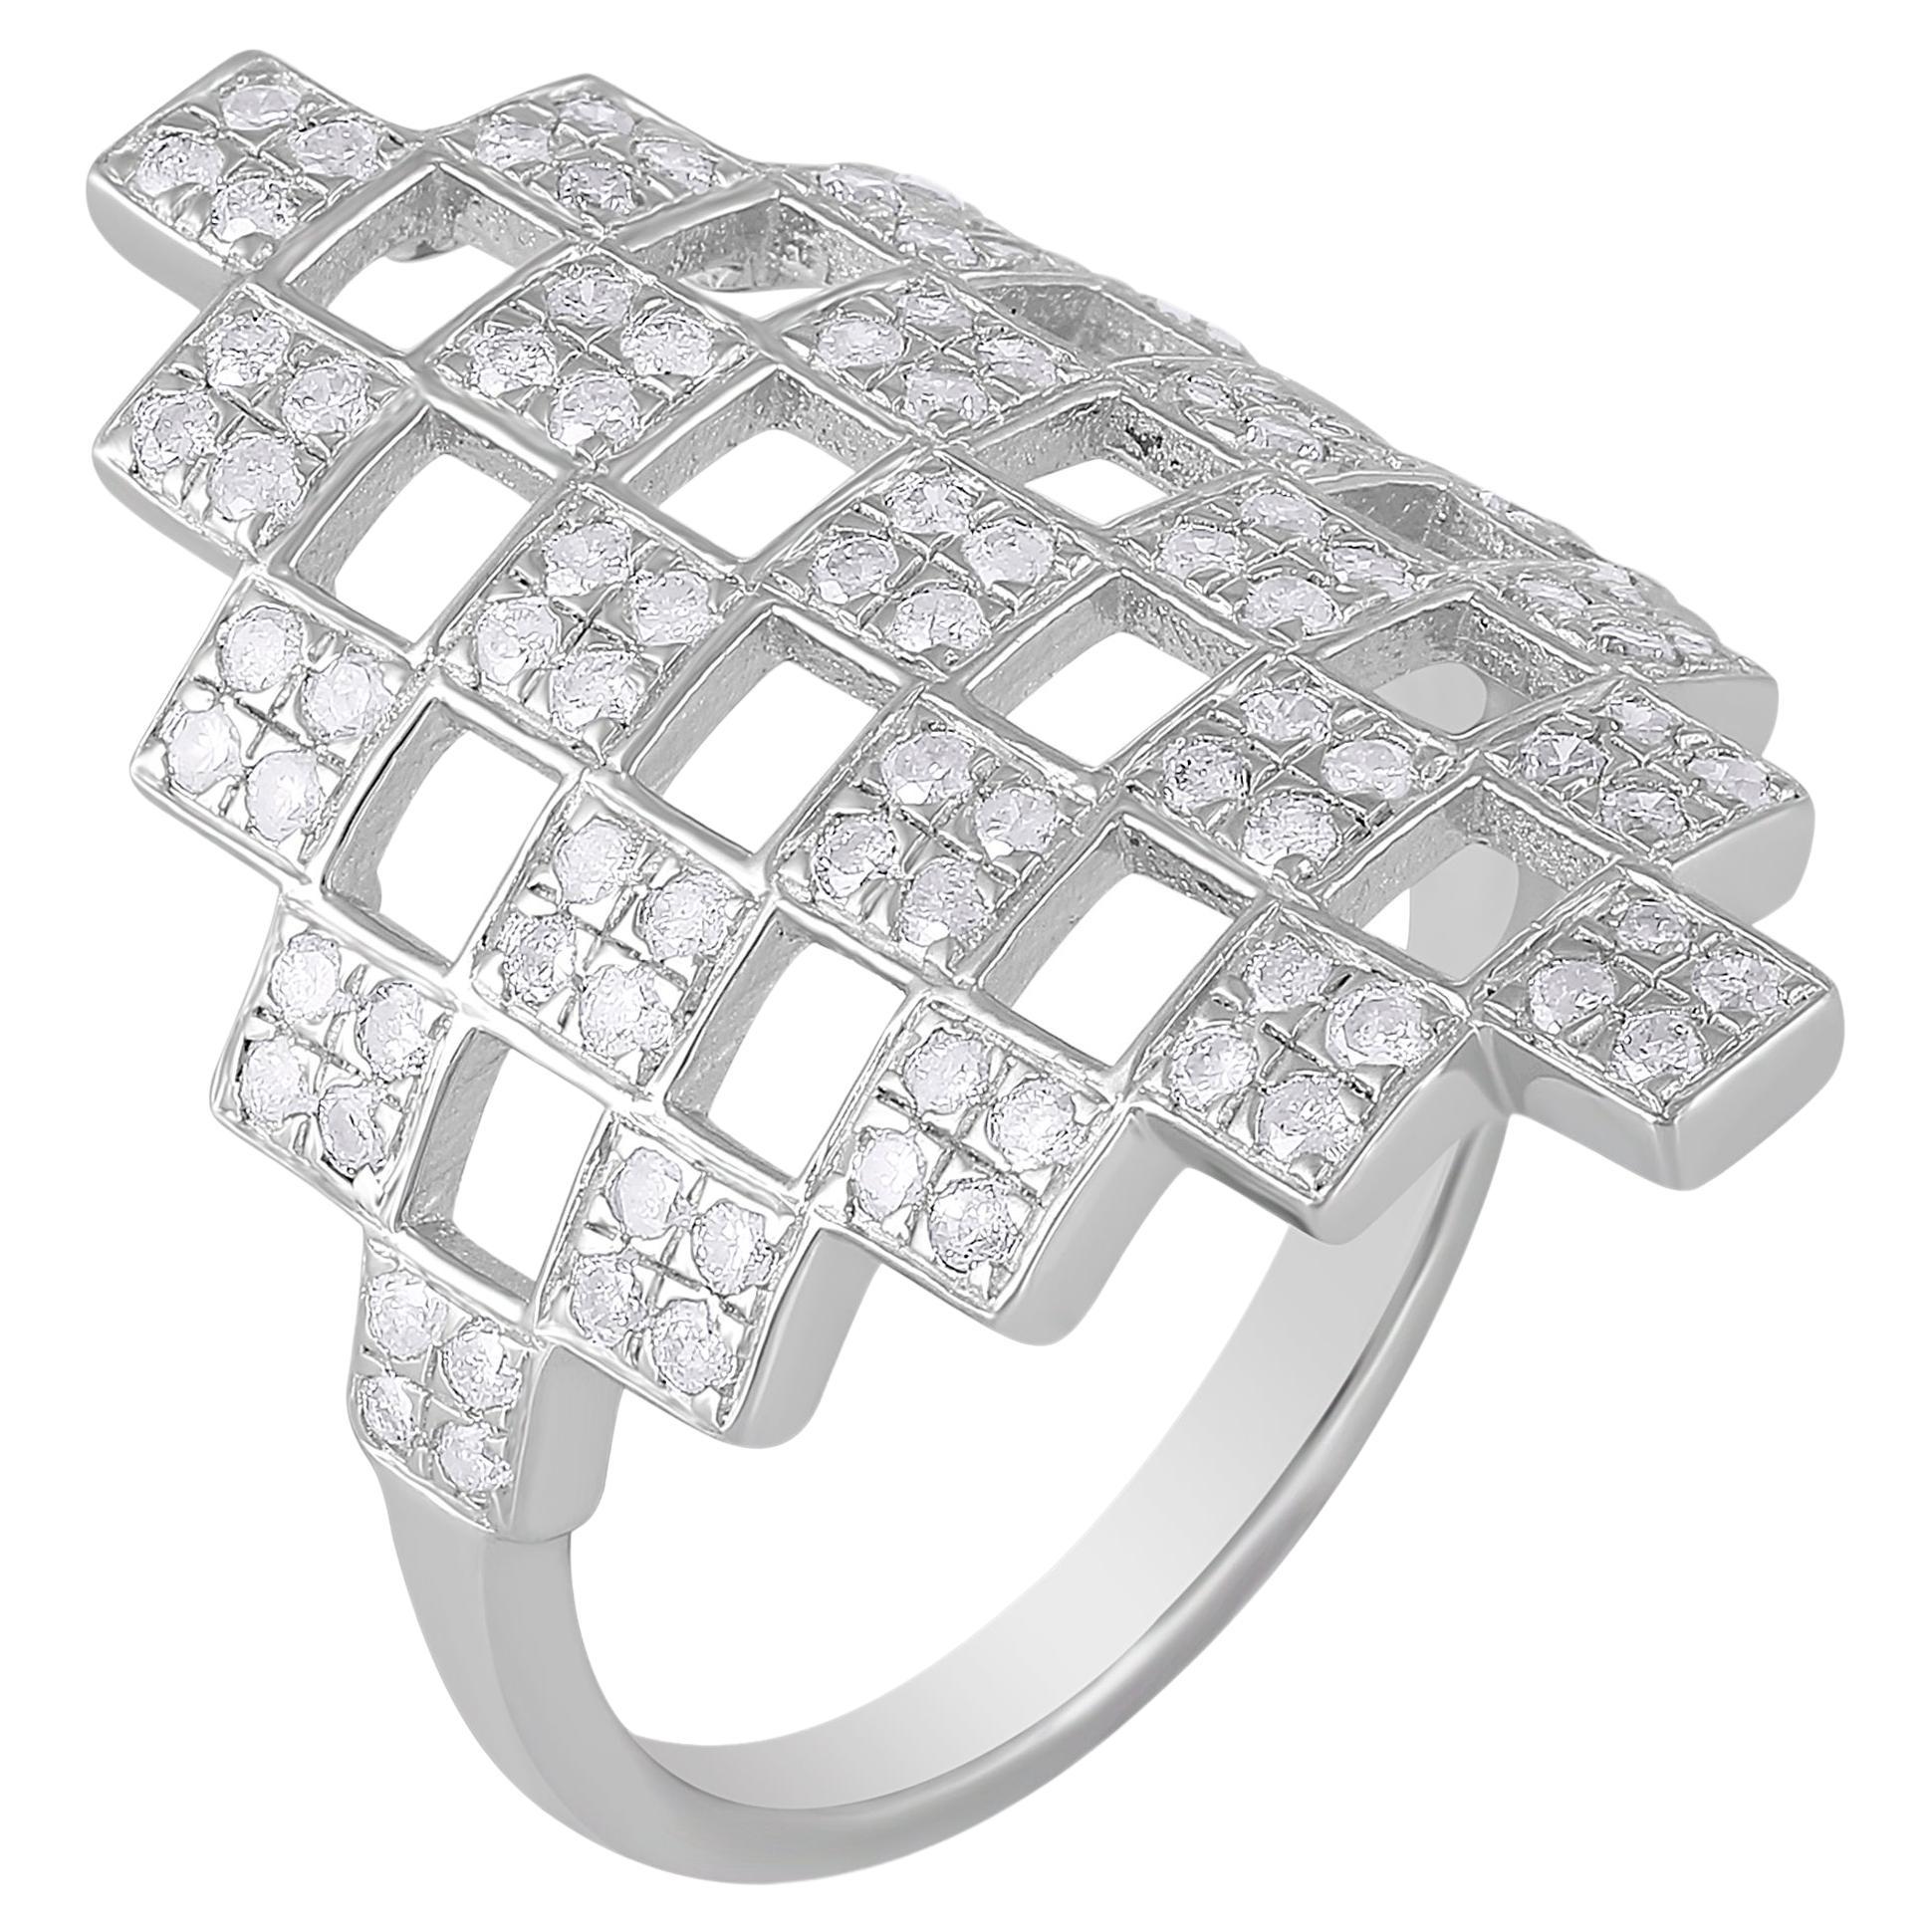 Gemistry 0.88 Carat T.W. Diamond Freeform Latice Ring in 925 Sterling Silver For Sale